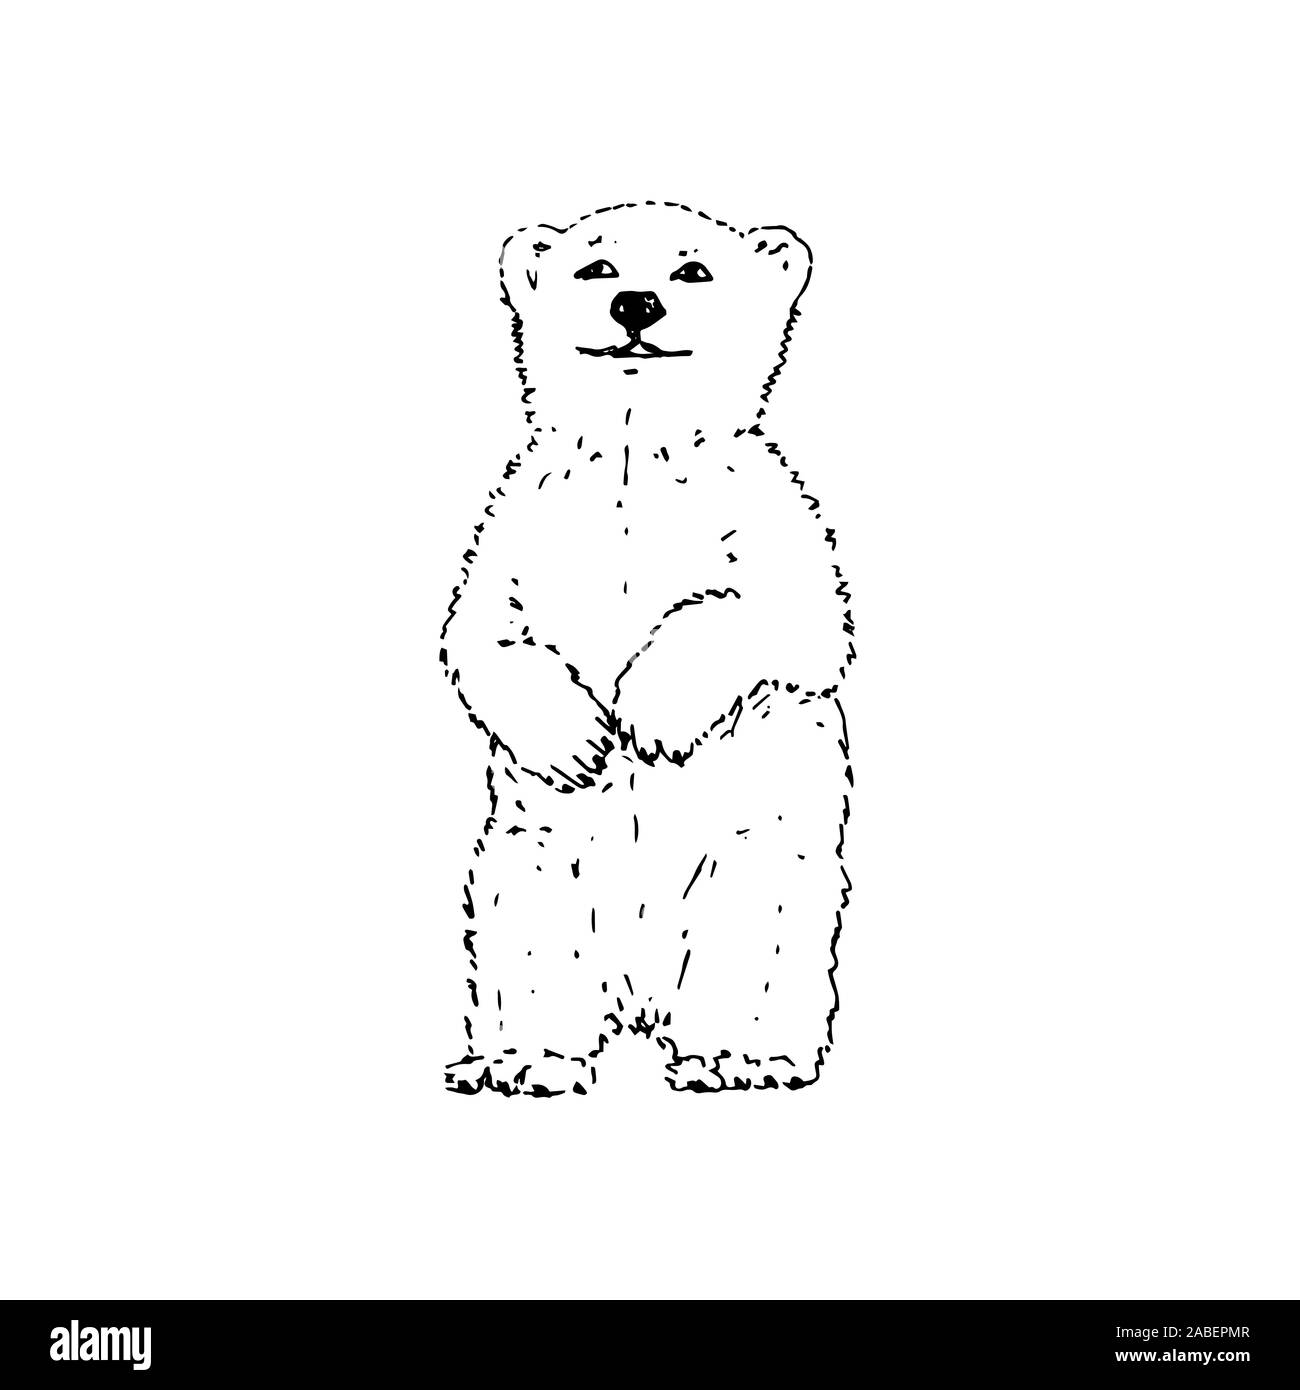 Polar bear. Black outline on white background. Picture can be used in greeting cards, posters, flyers, banners, logo, further design etc. Vector illustration. EPS10 Stock Vector